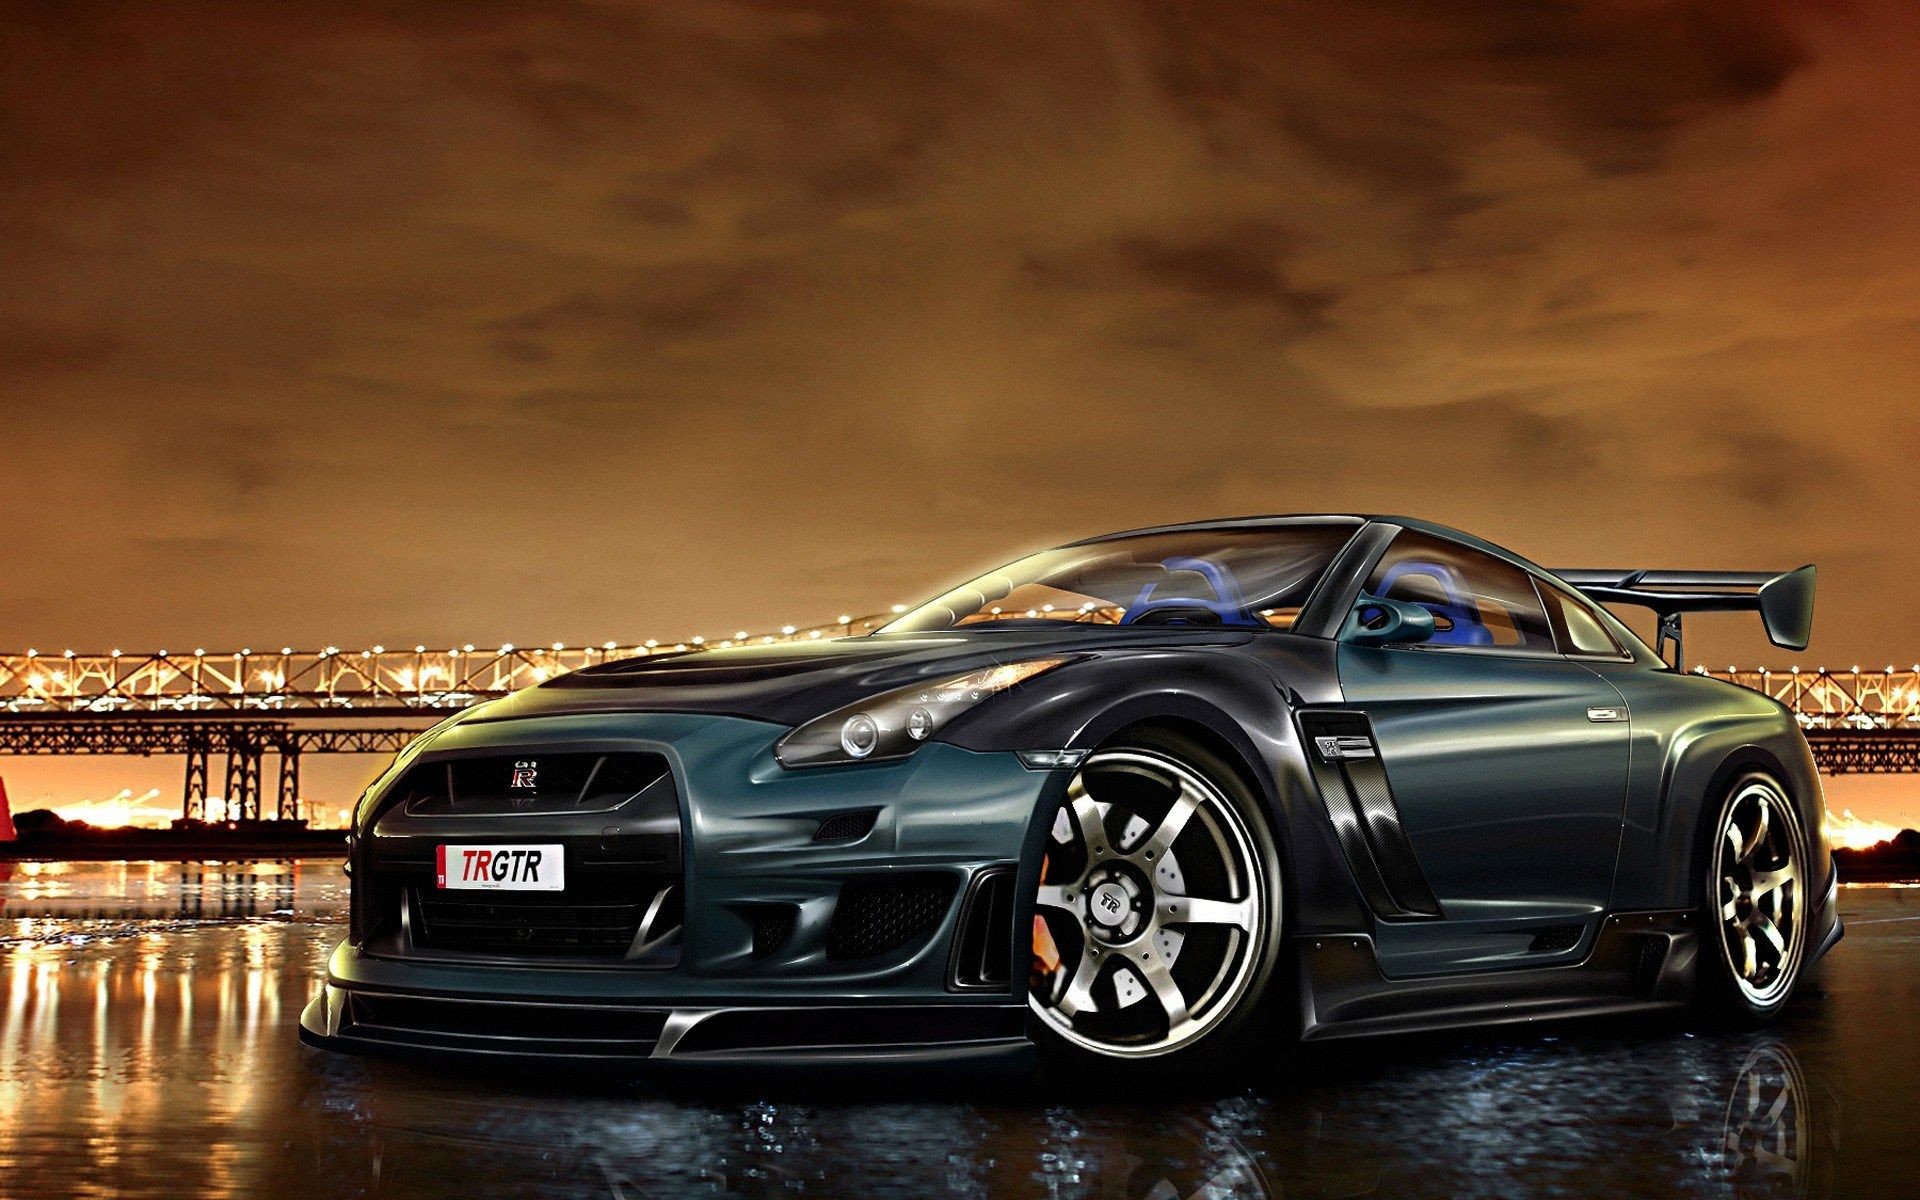 Nissan Gt R Wallpaper (best Nissan Gt R Wallpaper and image) on WallpaperChat